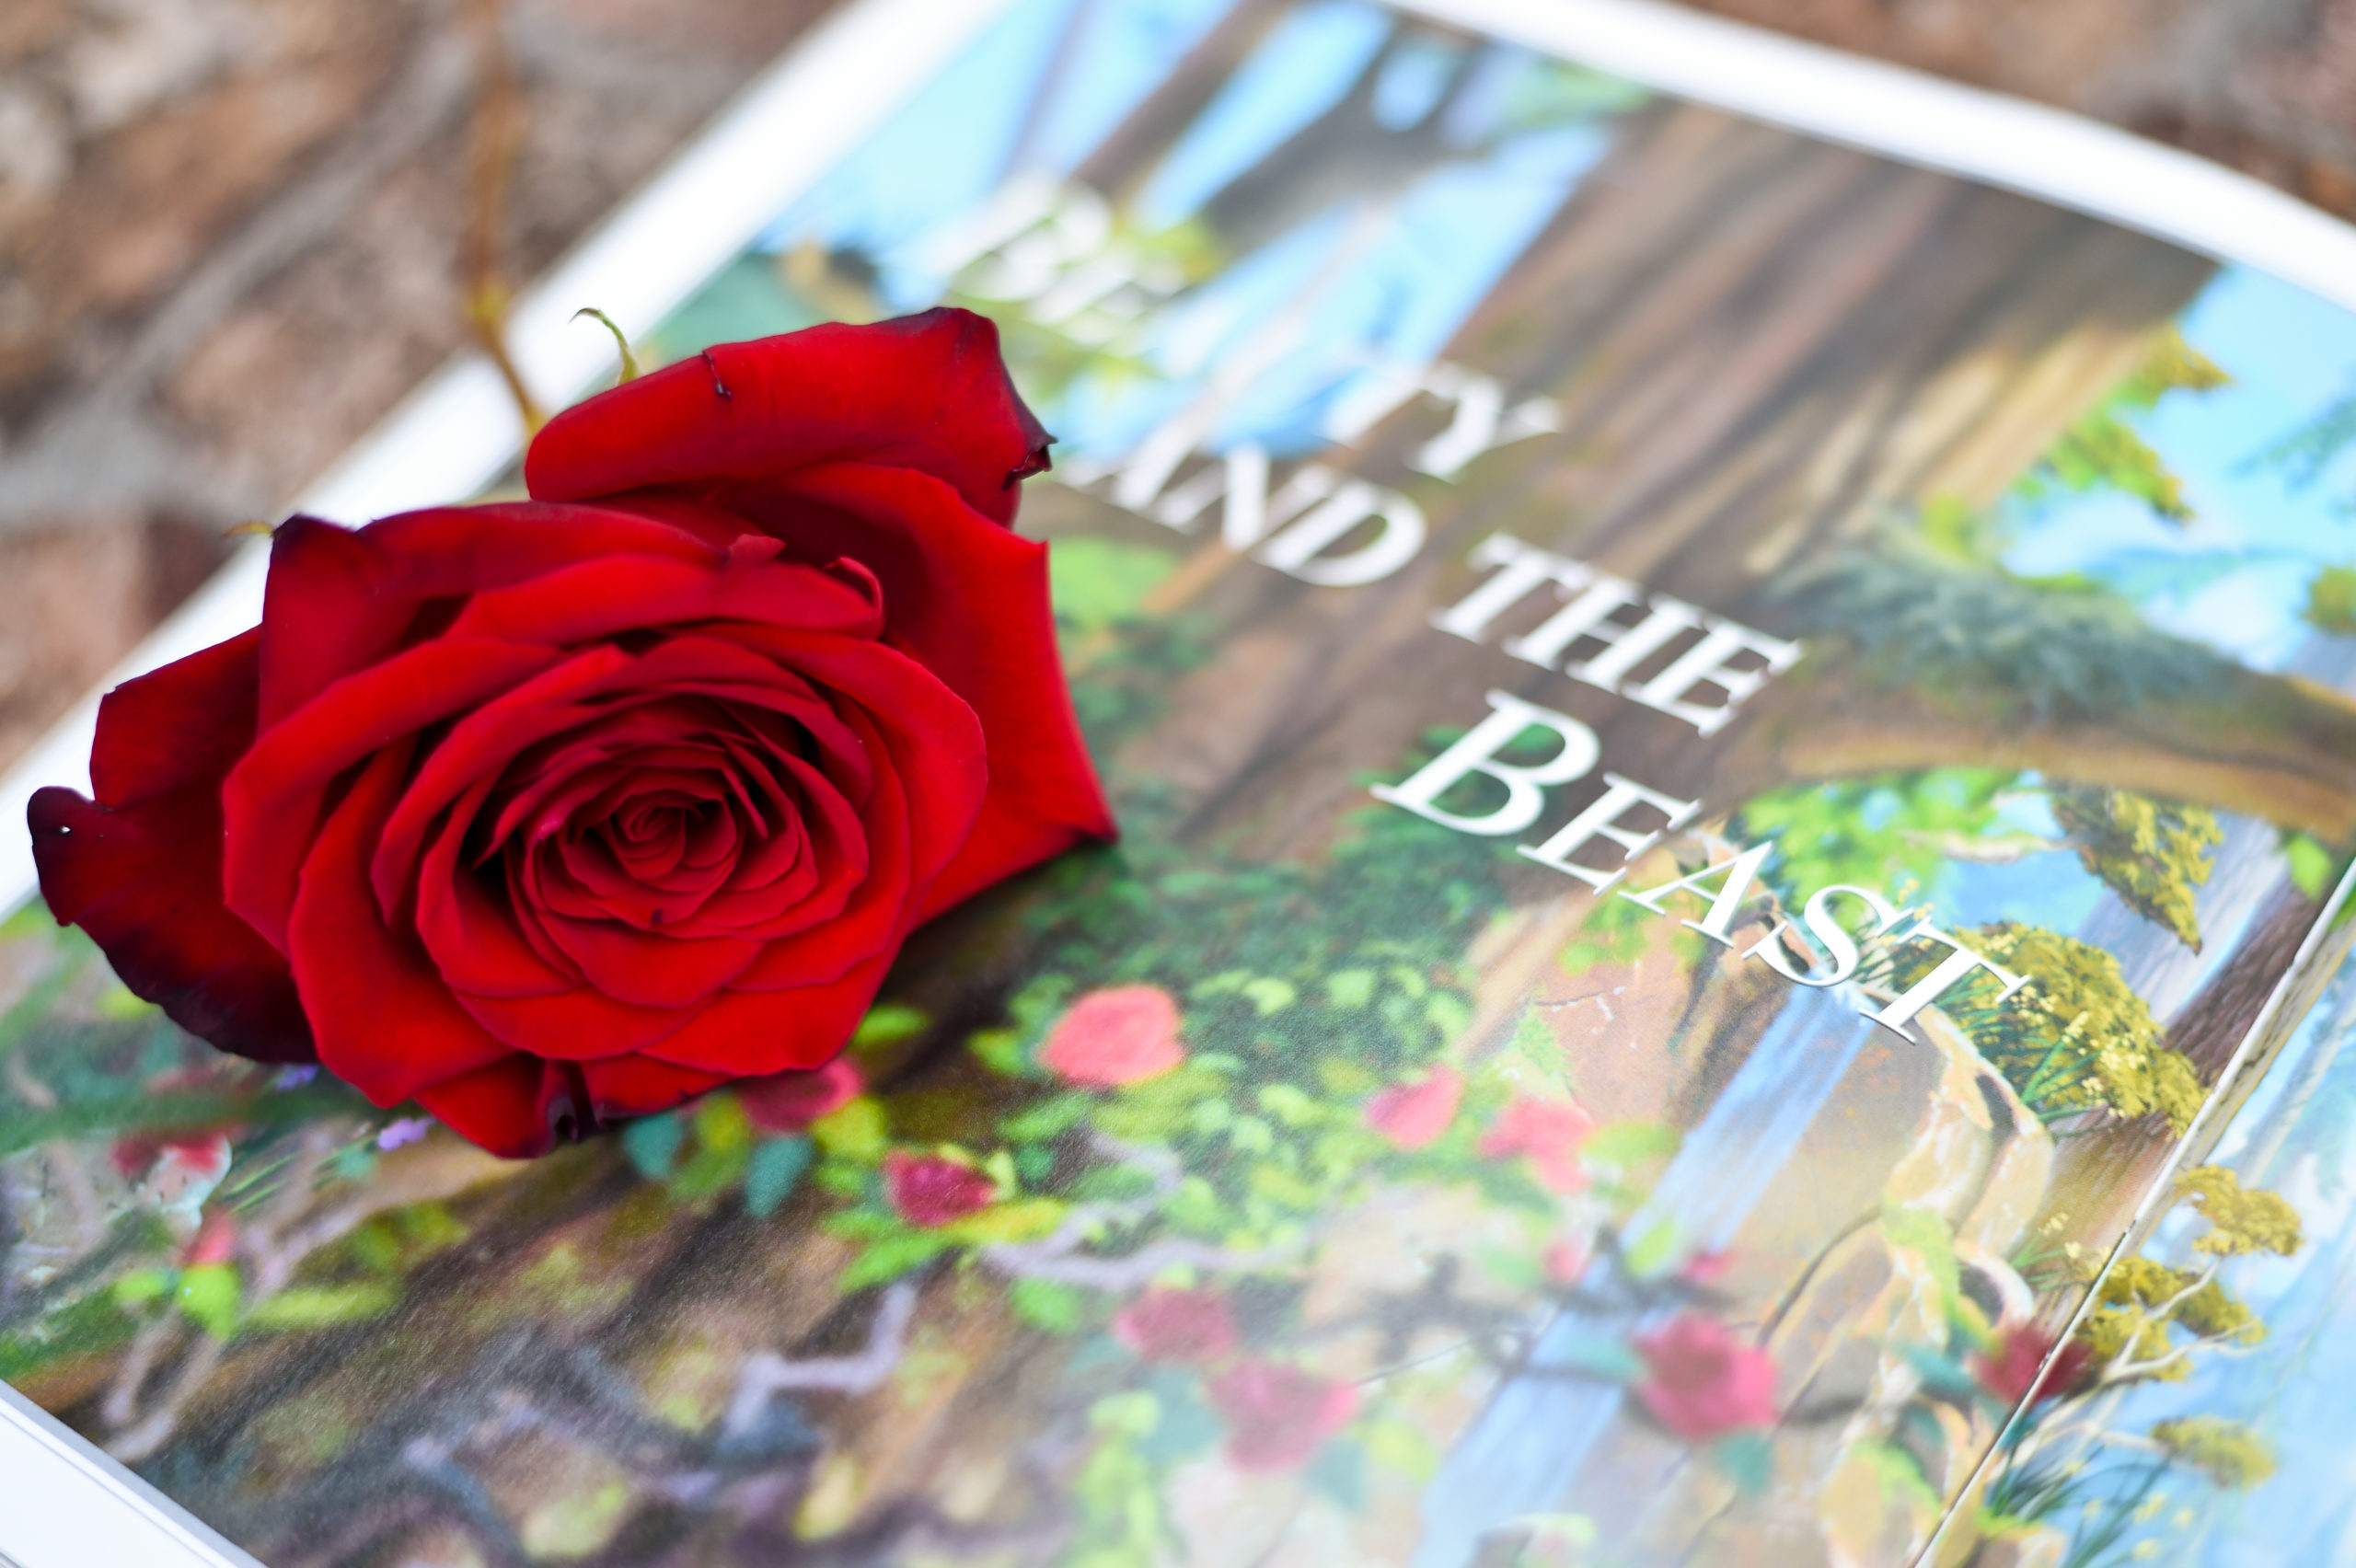 Looking for Disney wedding ideas? This Beauty and the Beast wedding even featured the classic story book with the infamous single stemmed red rose